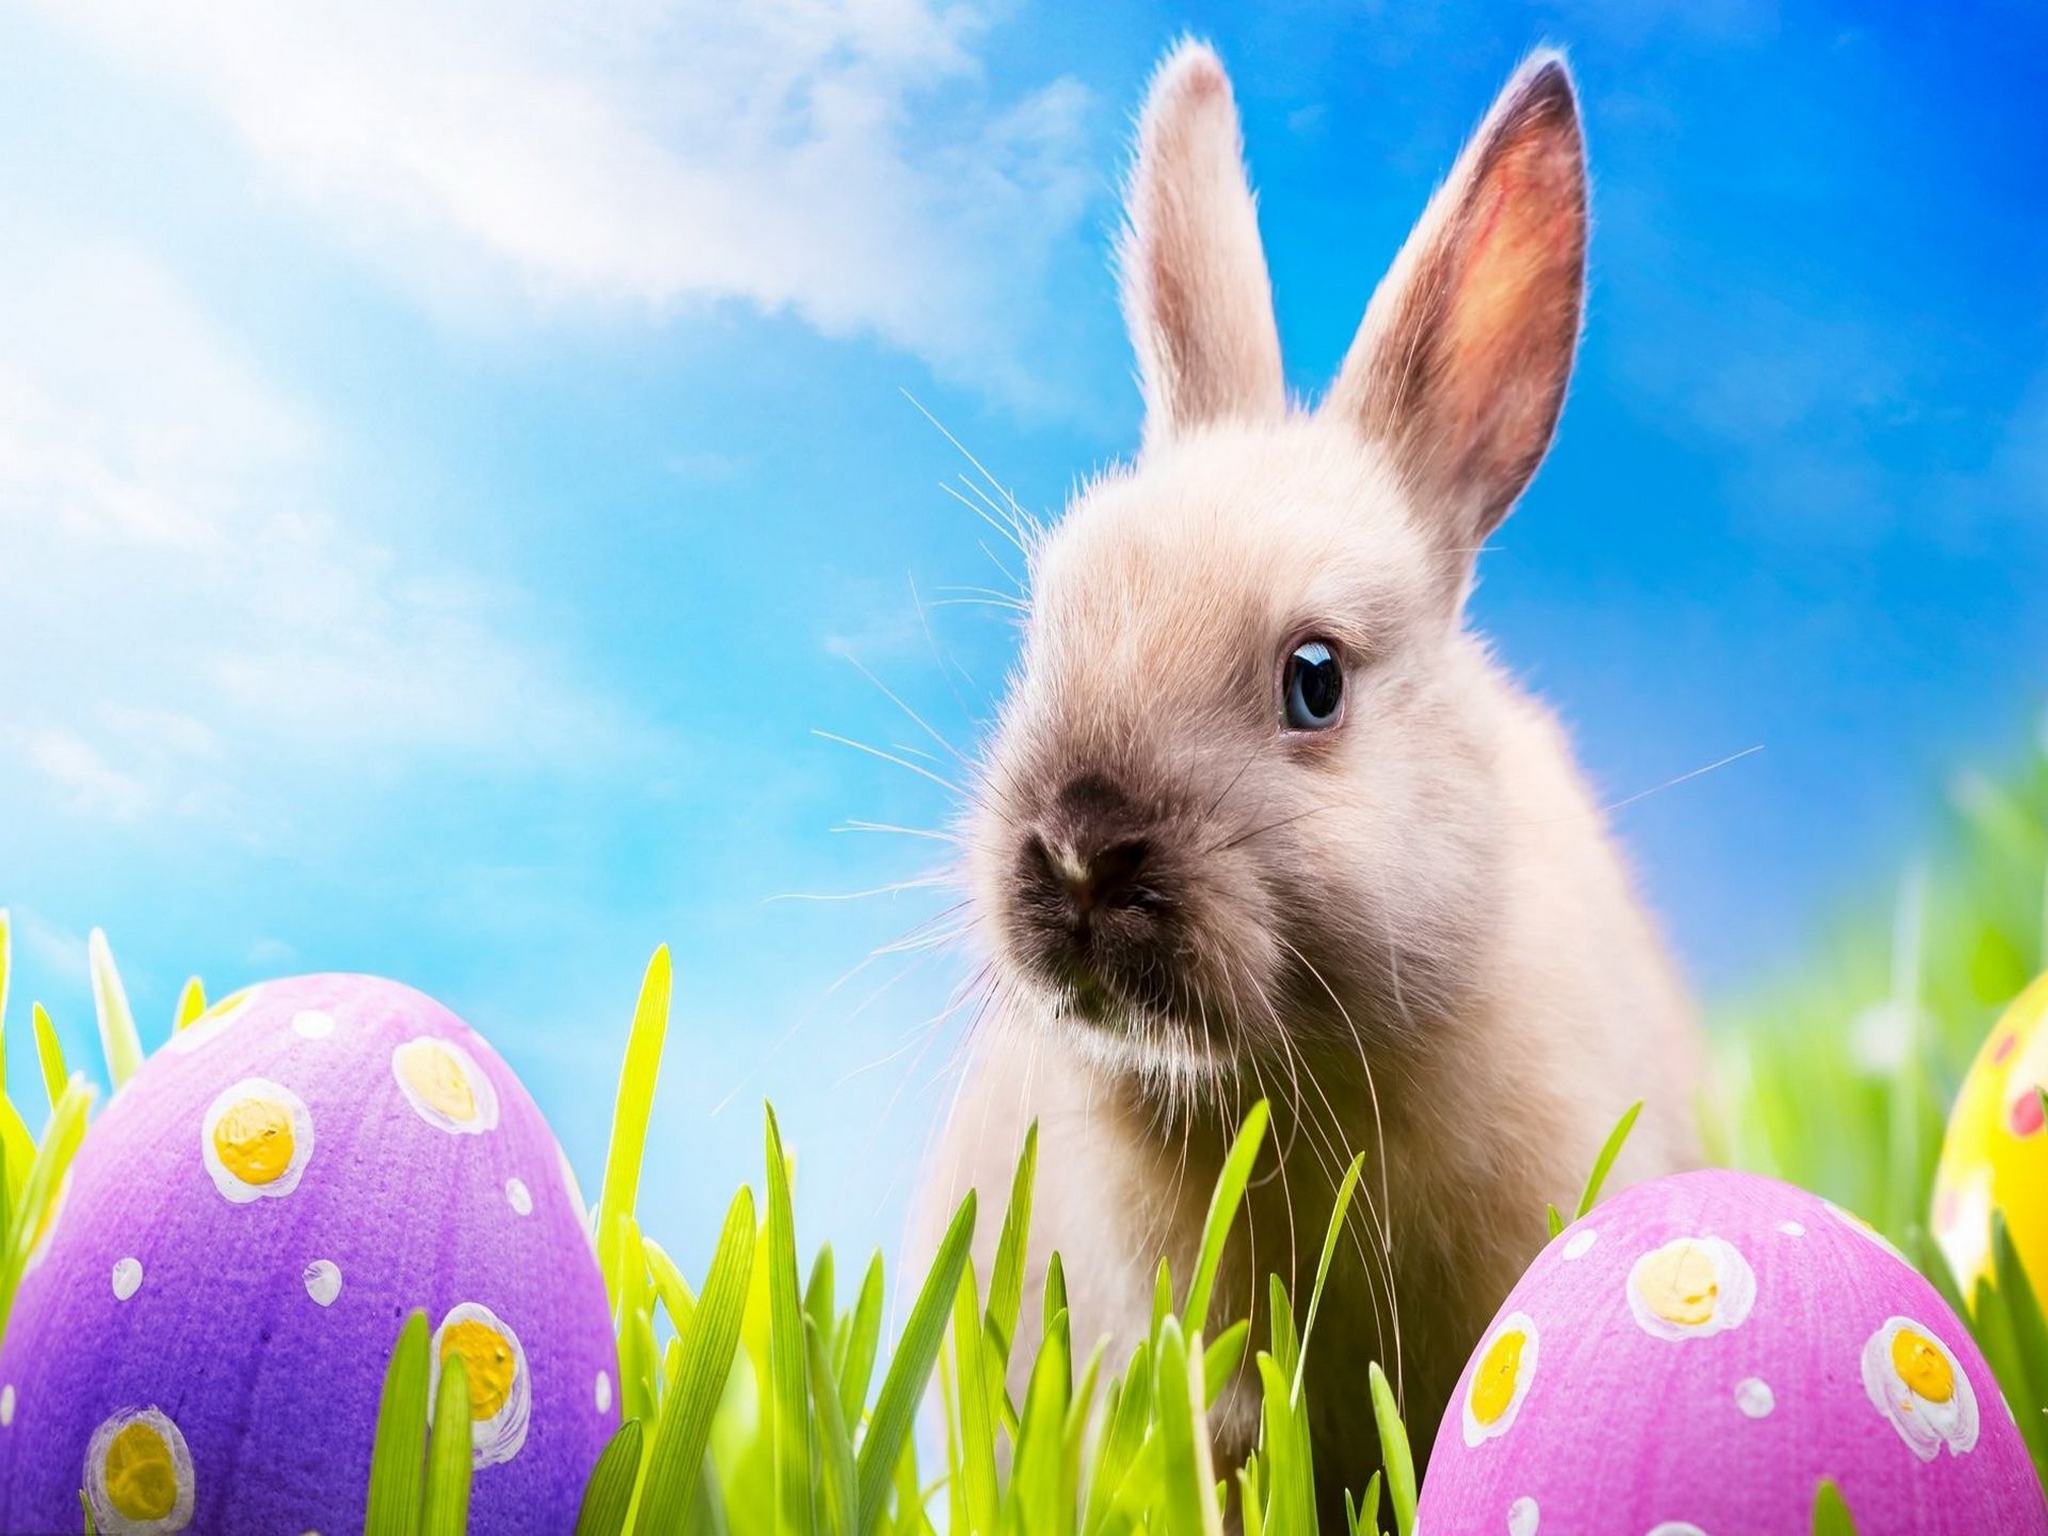  Free Wallpapers Backgrounds   Rabbit Easter eggs iPad wallpaper 3